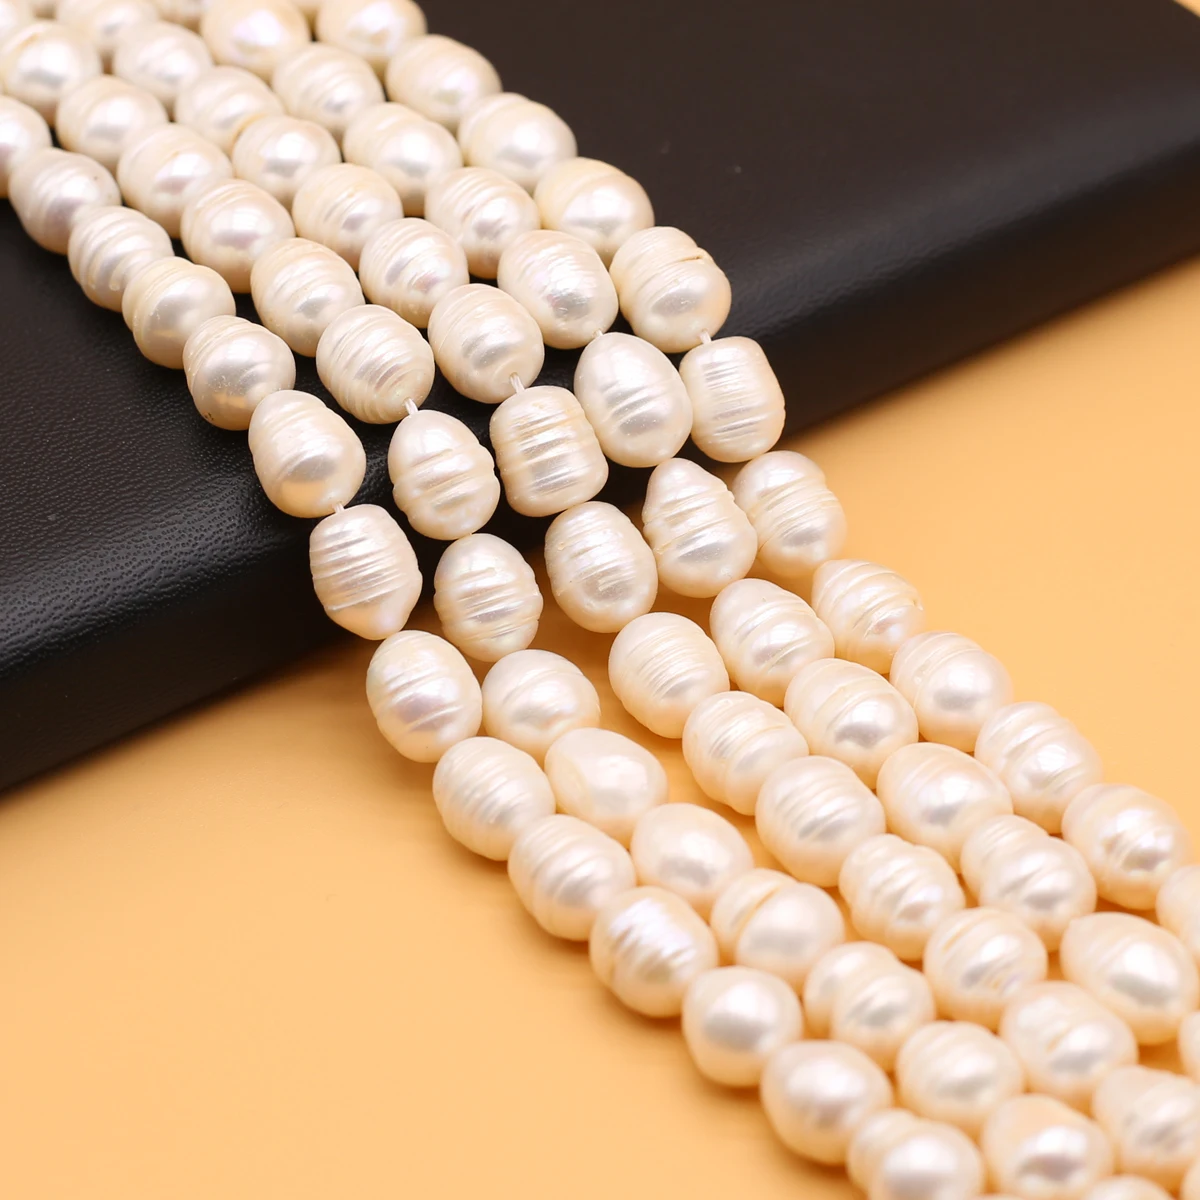 

Natural Freshwater Pearl 4 8 10mm Rourd Beads Beaded White Big Small Loose Spacer Beads For Jewelry Making DIY Bracelet Necklace